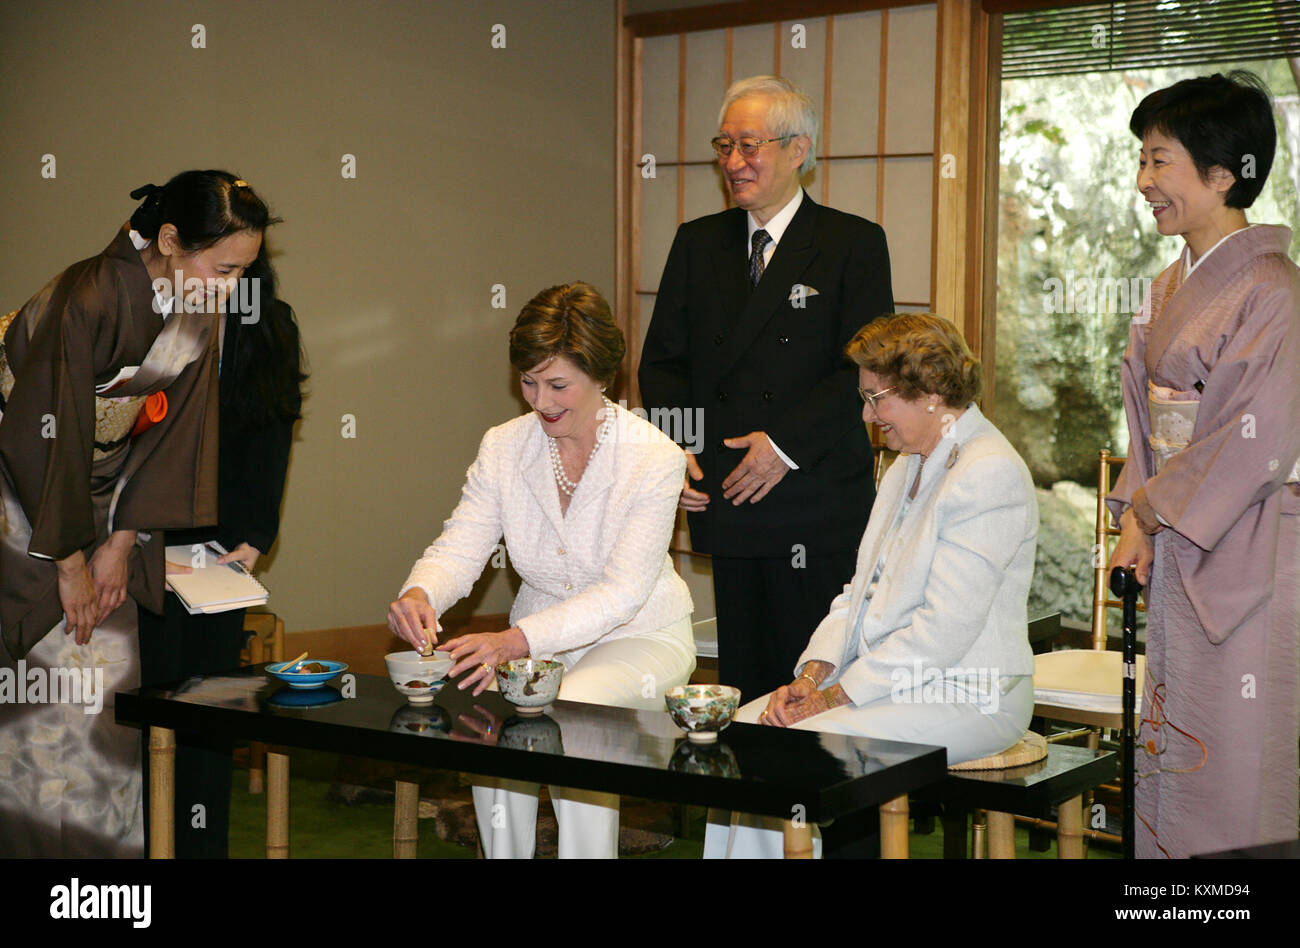 First lady Laura Bush, joined by her mother, Mrs. Jenna Welch, right, is given whisking instructions by Ms. Sakiko Akiyama, executive assistant to Grand Master Sen Genshitsu, left, while participating in a Japanese Tea Ceremony, Monday, April 17, 2006, in Washington, DC, with H.E. Ryozo Kato, Ambassador of Japan to the US, and his wife, Mrs. Hanayo Kato.  Mandatory Credit: Shealah Craighead / White House via CNP /MediaPunch Stock Photo